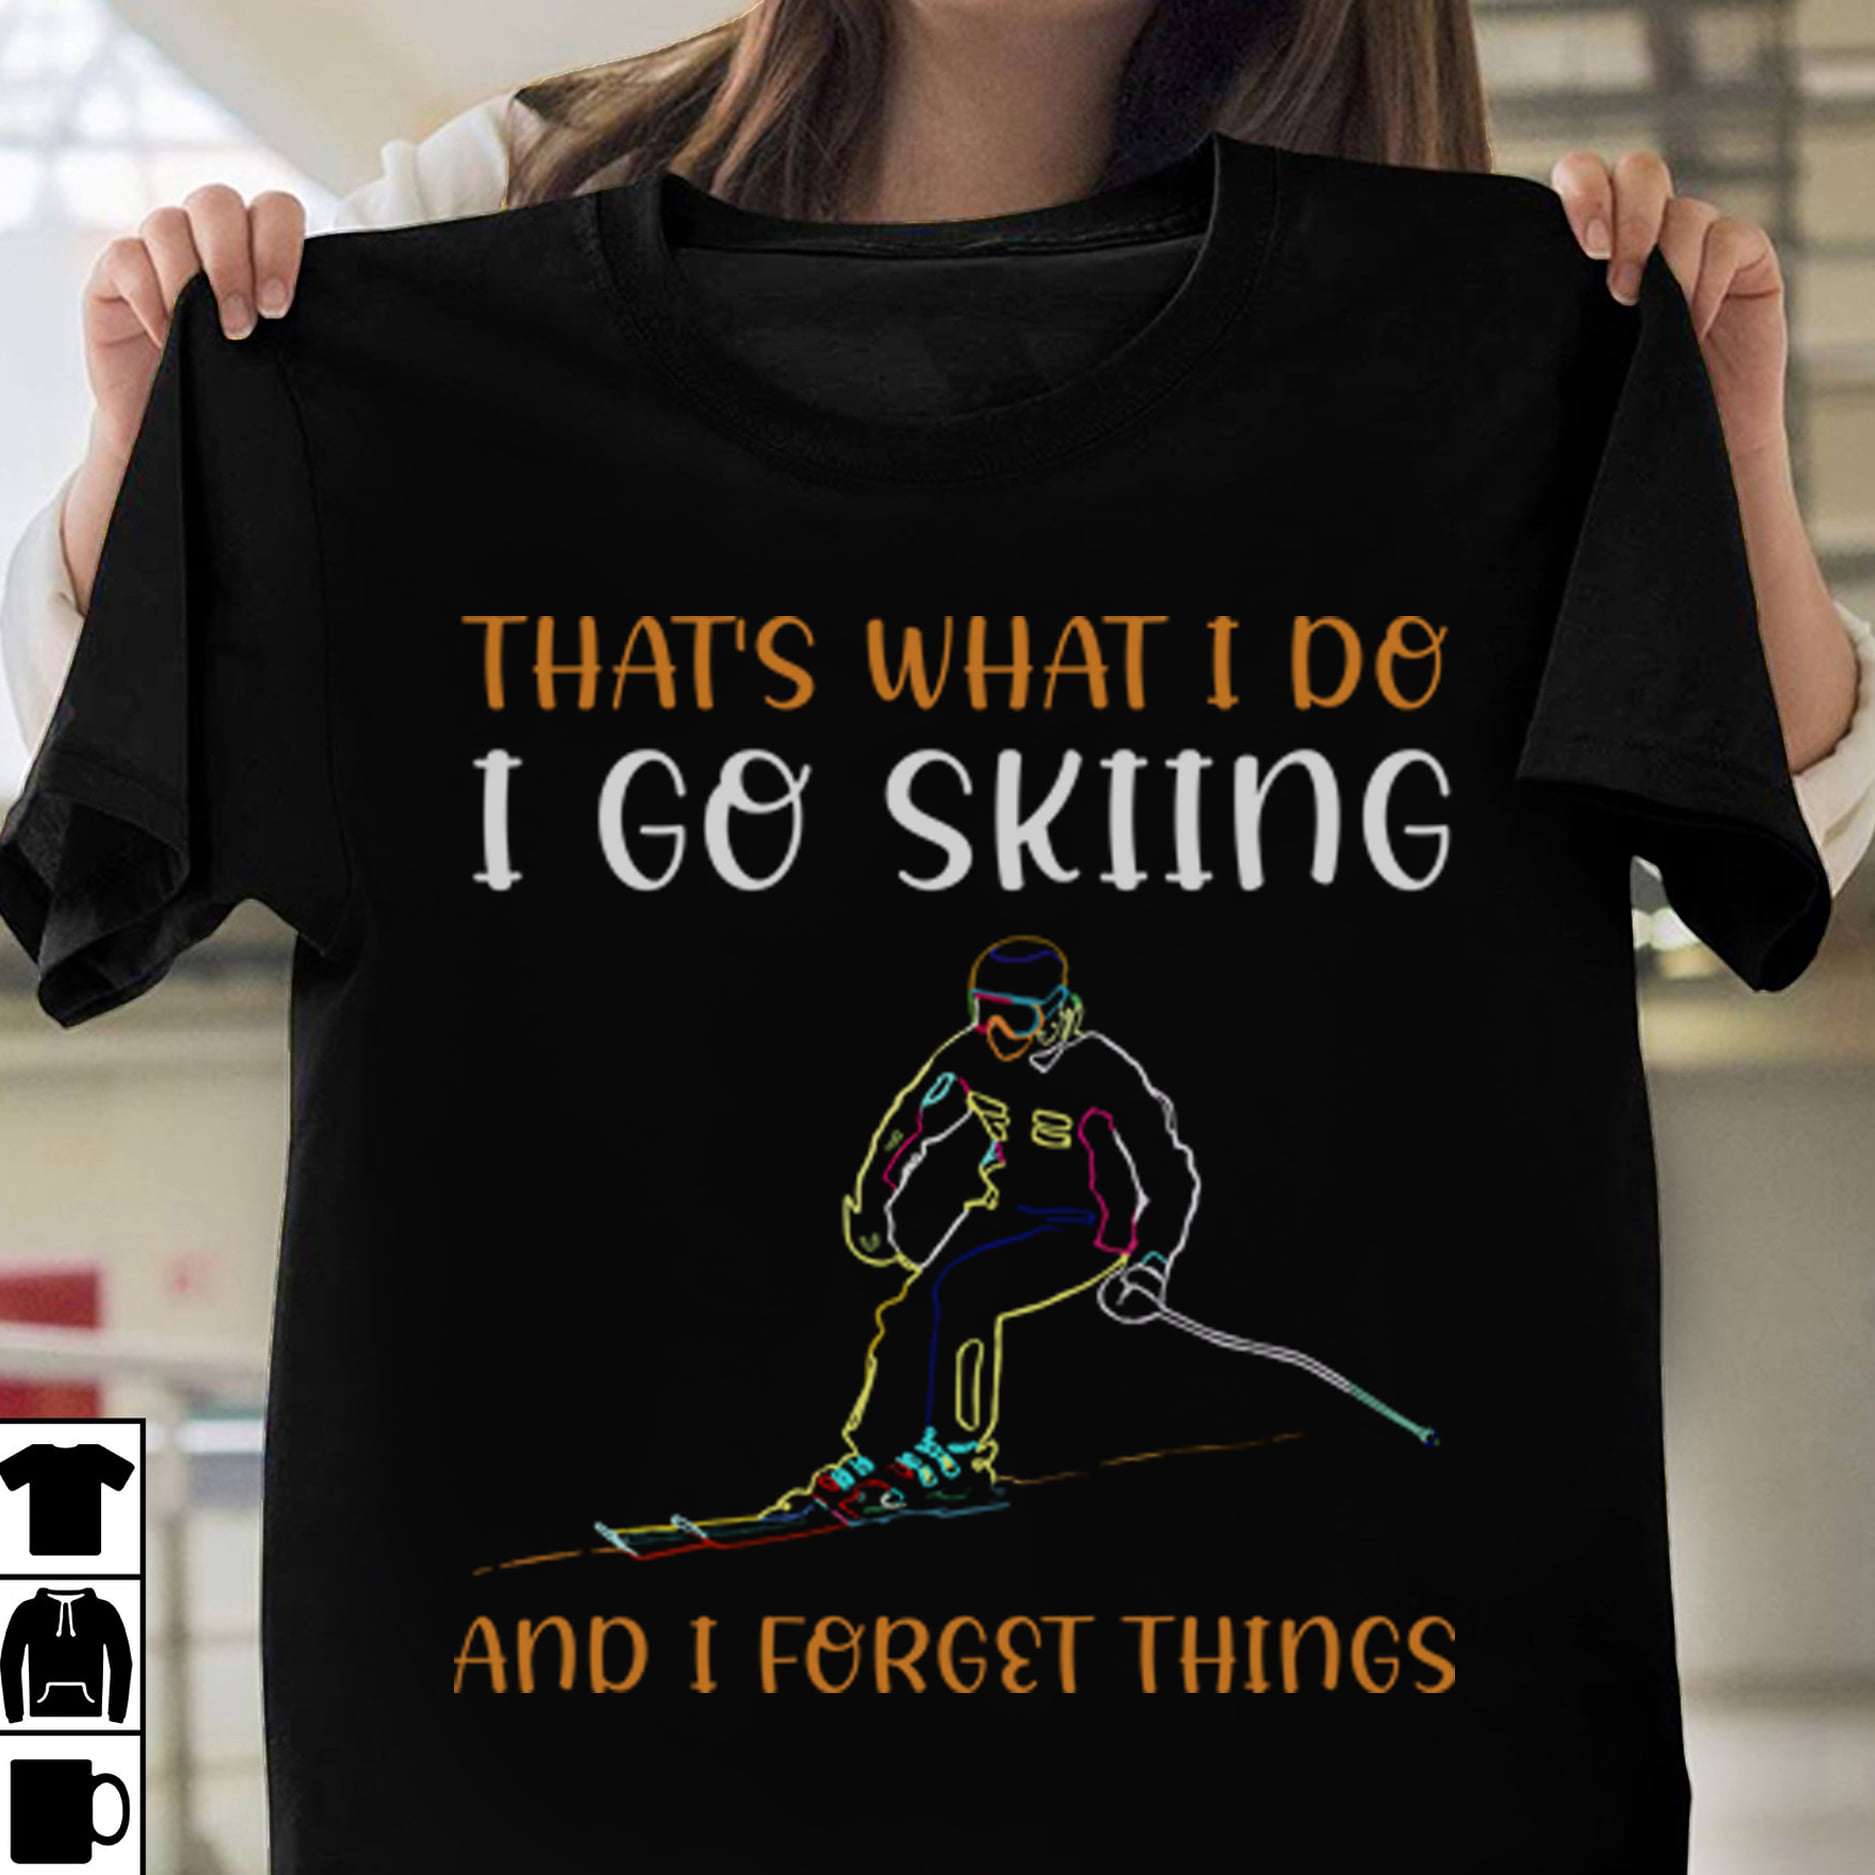 That's what I do I go skiing and I forget things - Love to go skiing, skiing the risky sport